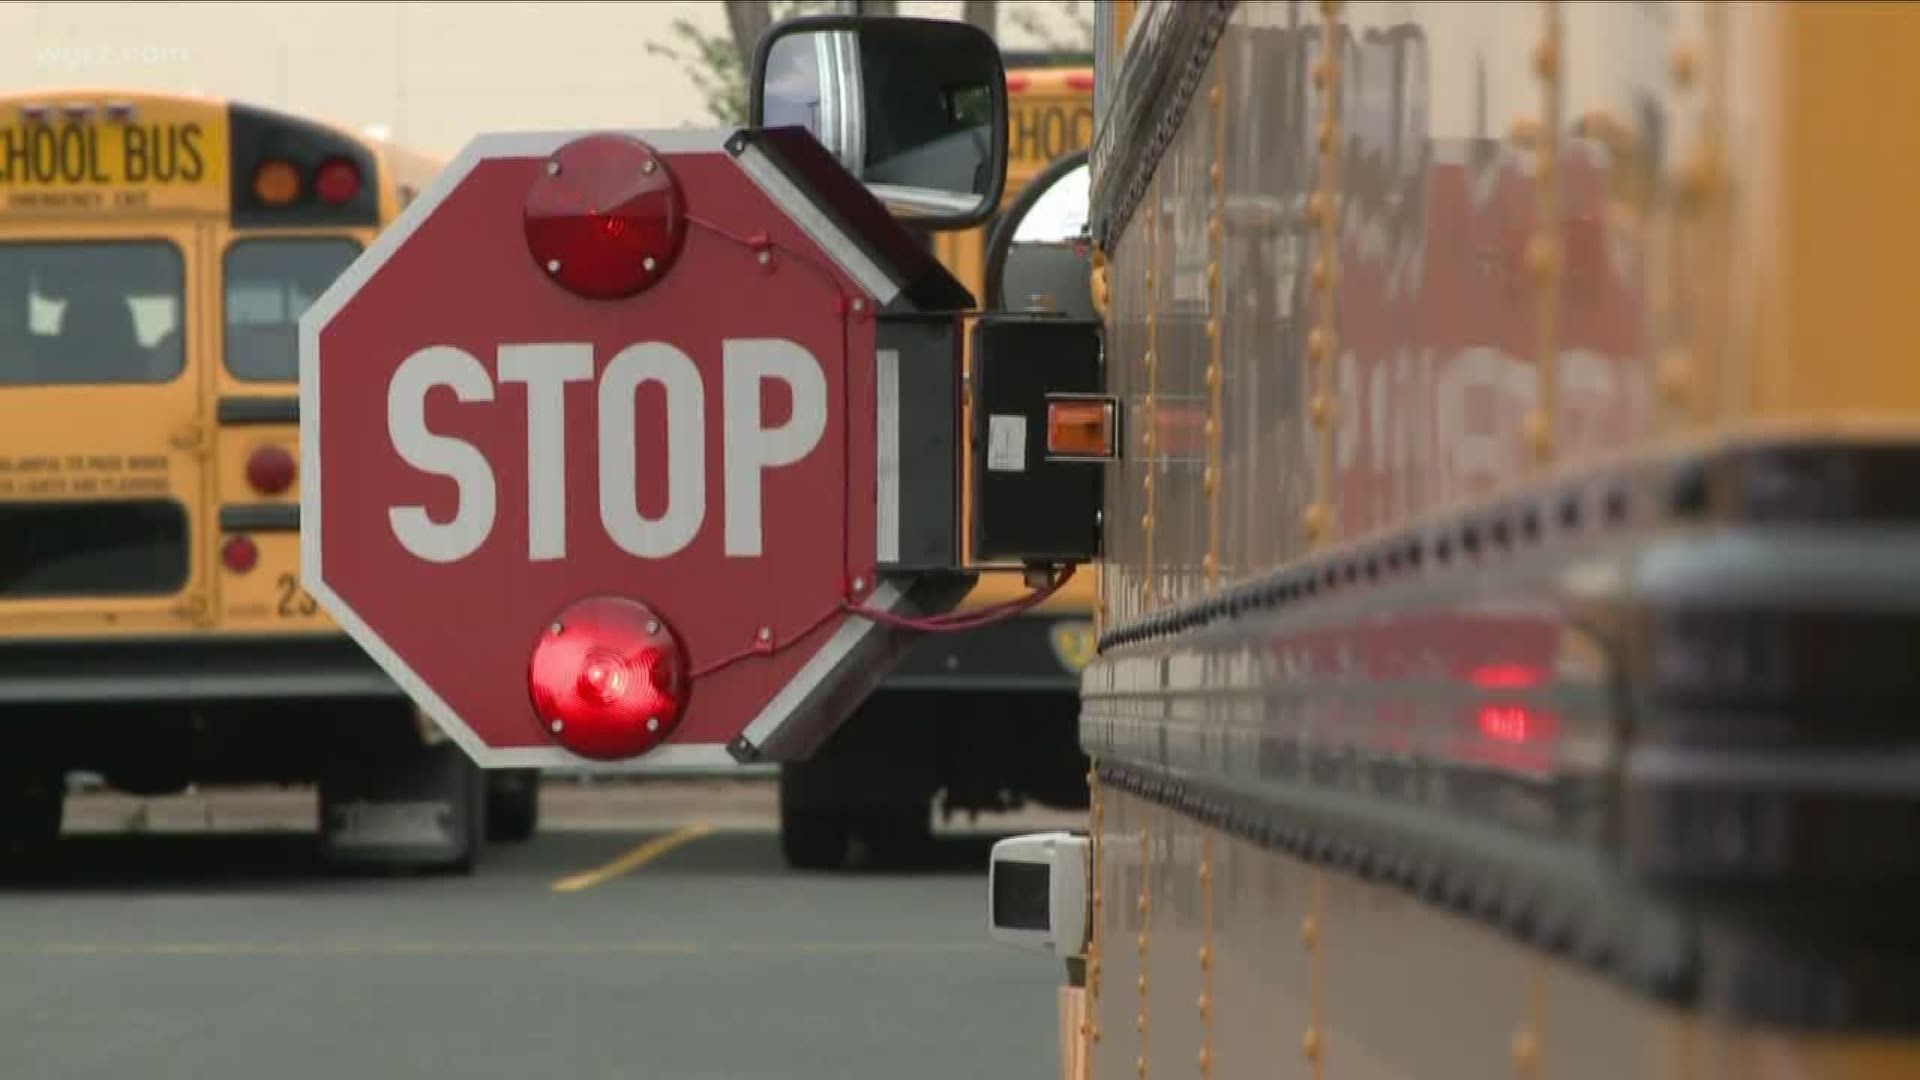 Governor Cuomo has signed a law now allowing school districts to install cameras on buses, to catch those who illegally pass them when stopped with their red light flashing.